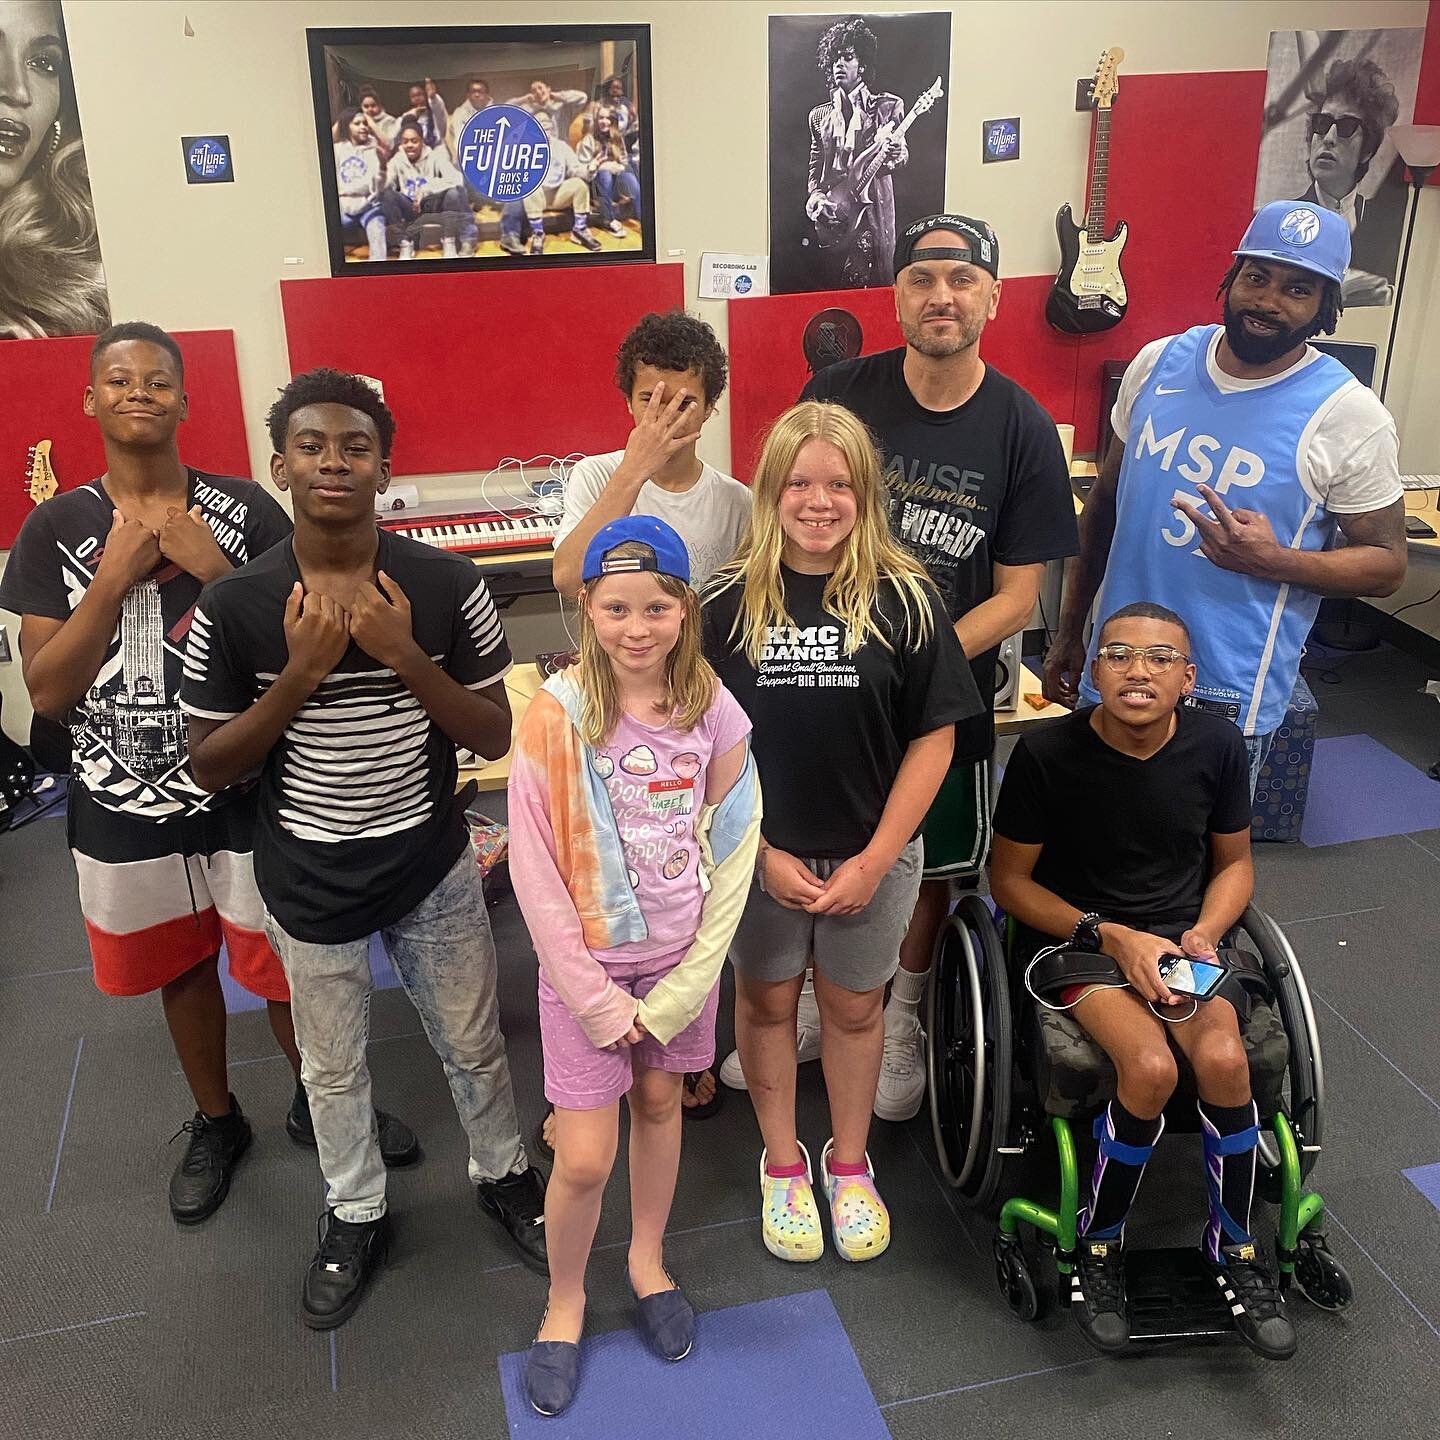 Today was my last day at DJ Summer Camp in North Minneapolis.. Thanks to @urbanworldmgmt for the opportunity, I can even begin to tell you how proud I am of these kids. We started off with a bunch, but these are the 6 that locked in &amp; saw it all 